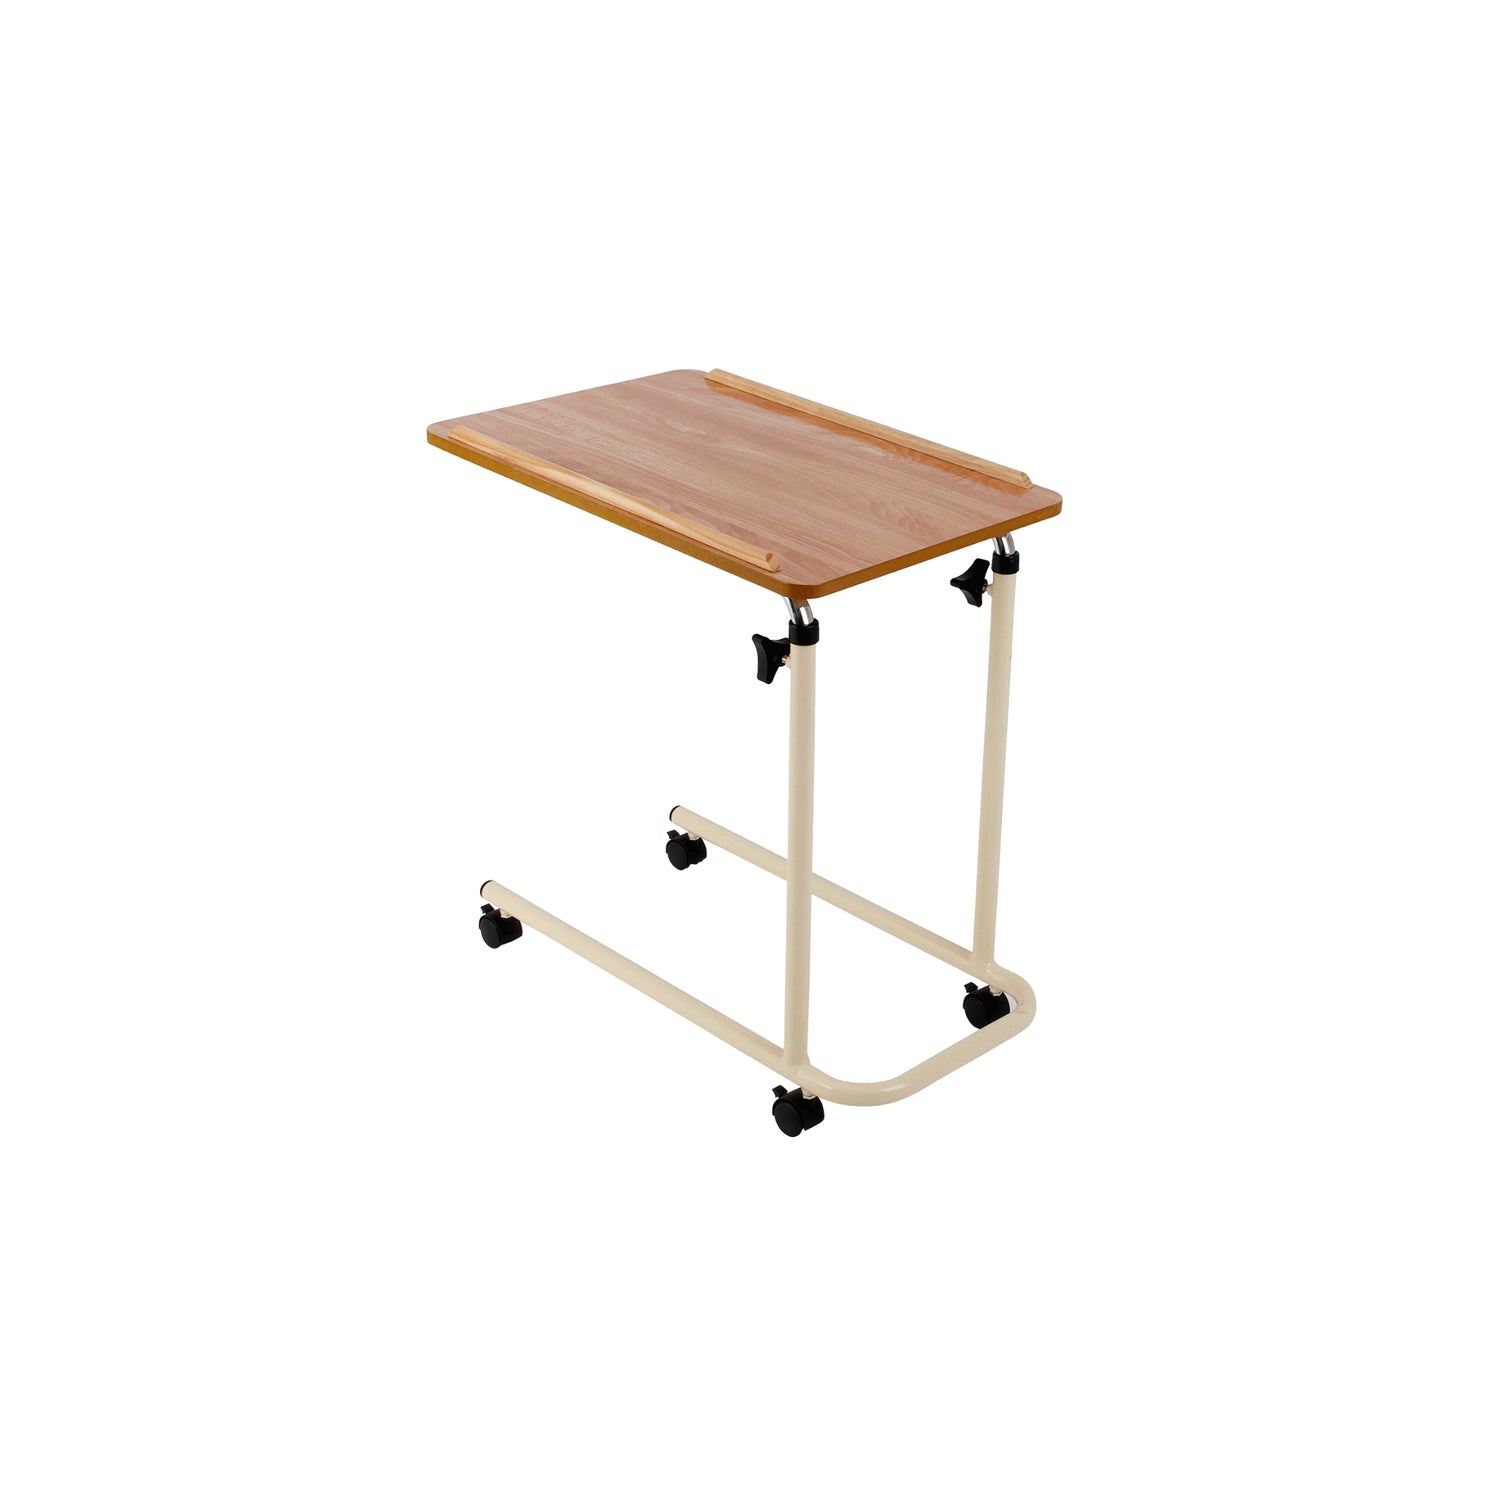 Days Overbed Table with Castors